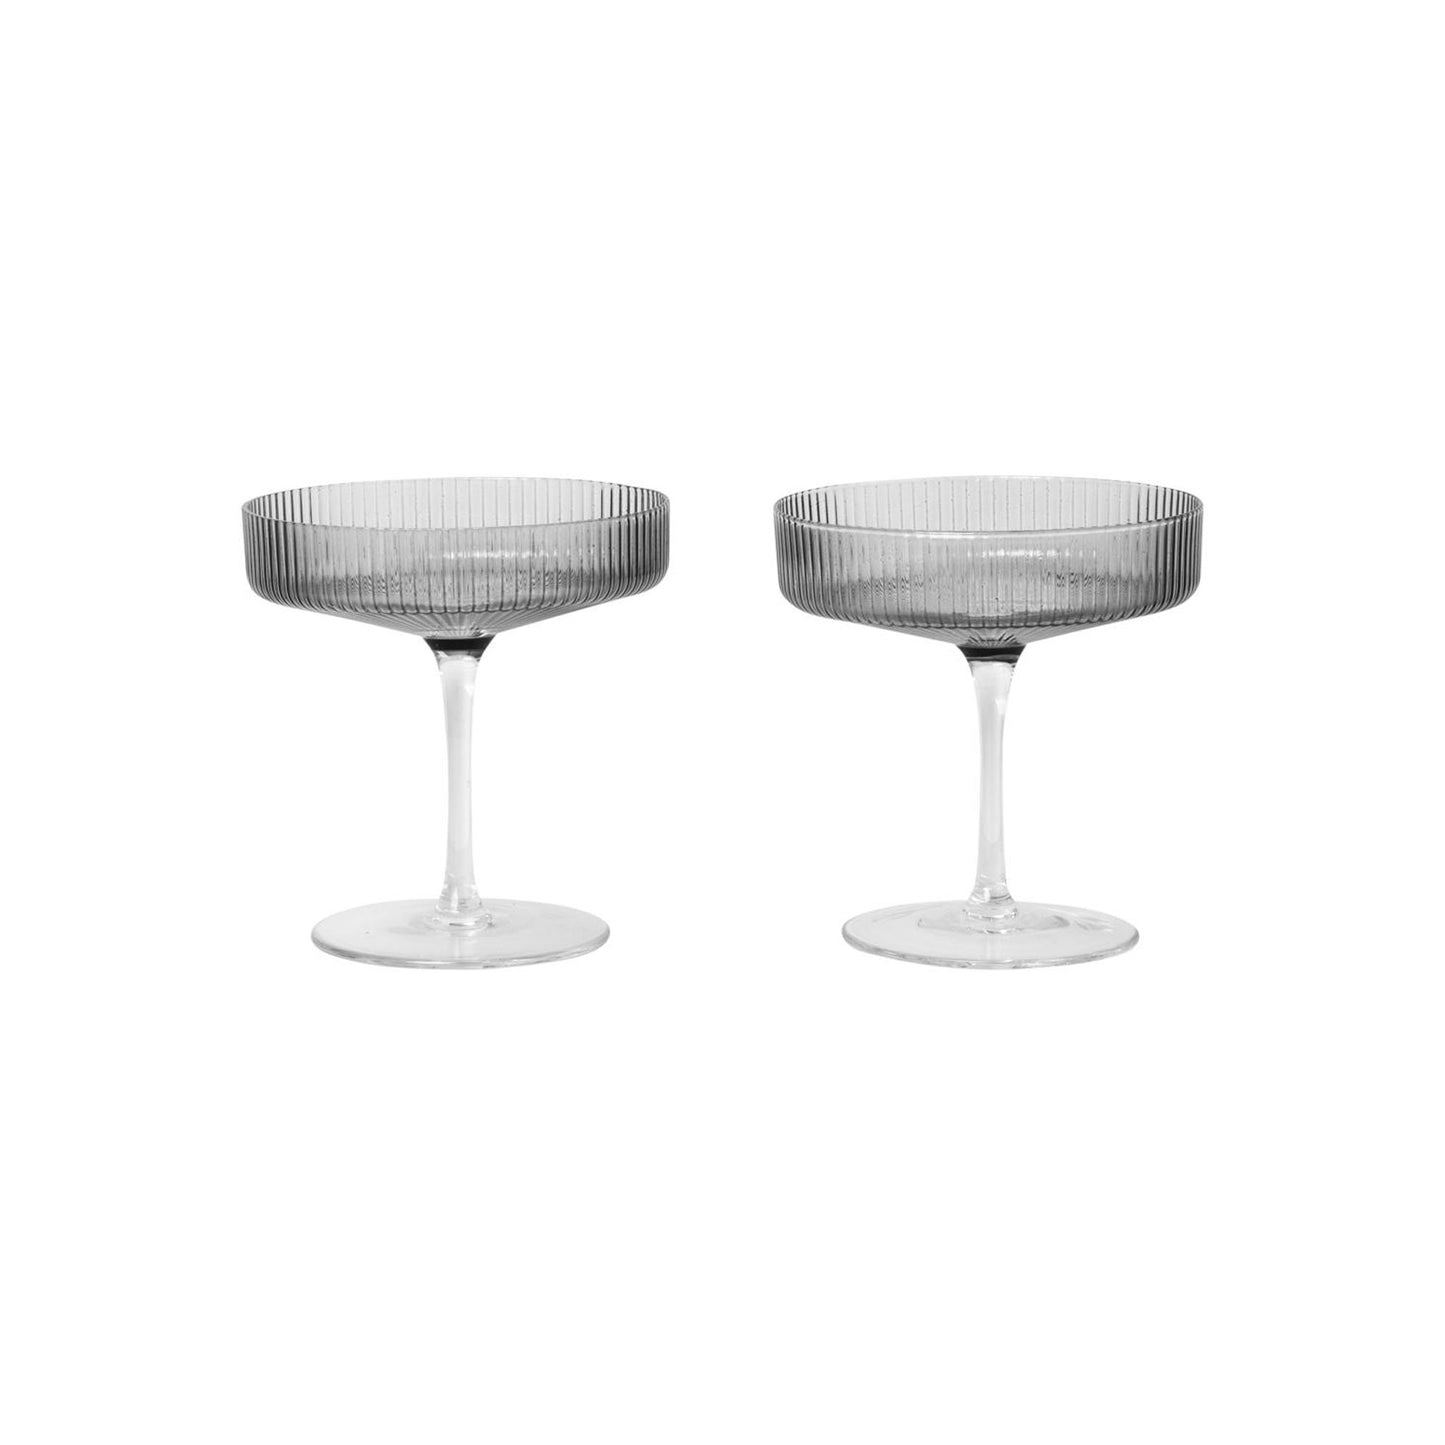 Ripple Champagne Bowl Set of 2 by Ferm Living #Smoked